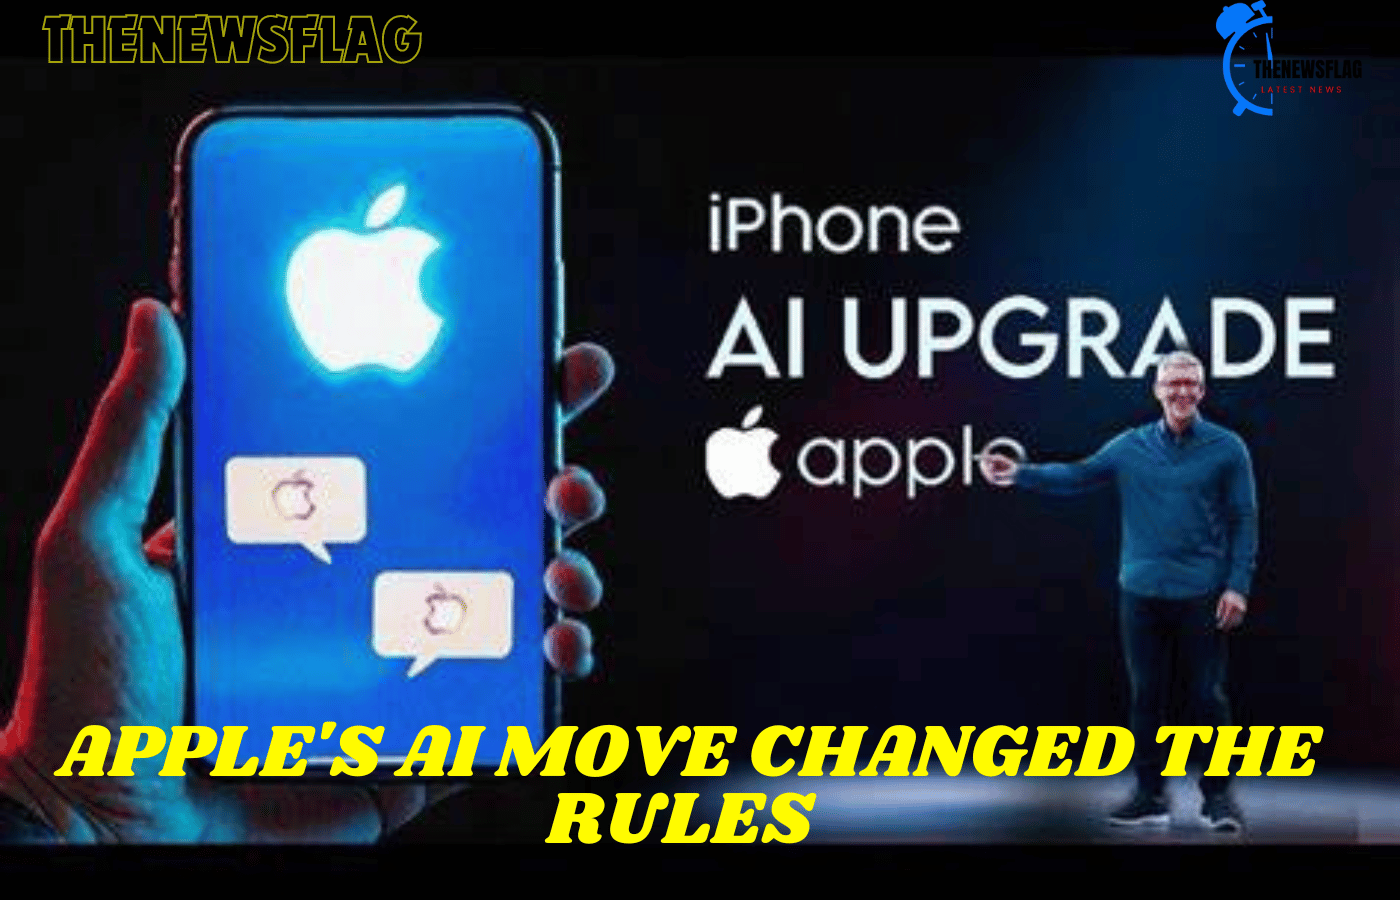 Just now, Apple's AI move changed the rules for all iPhone users.